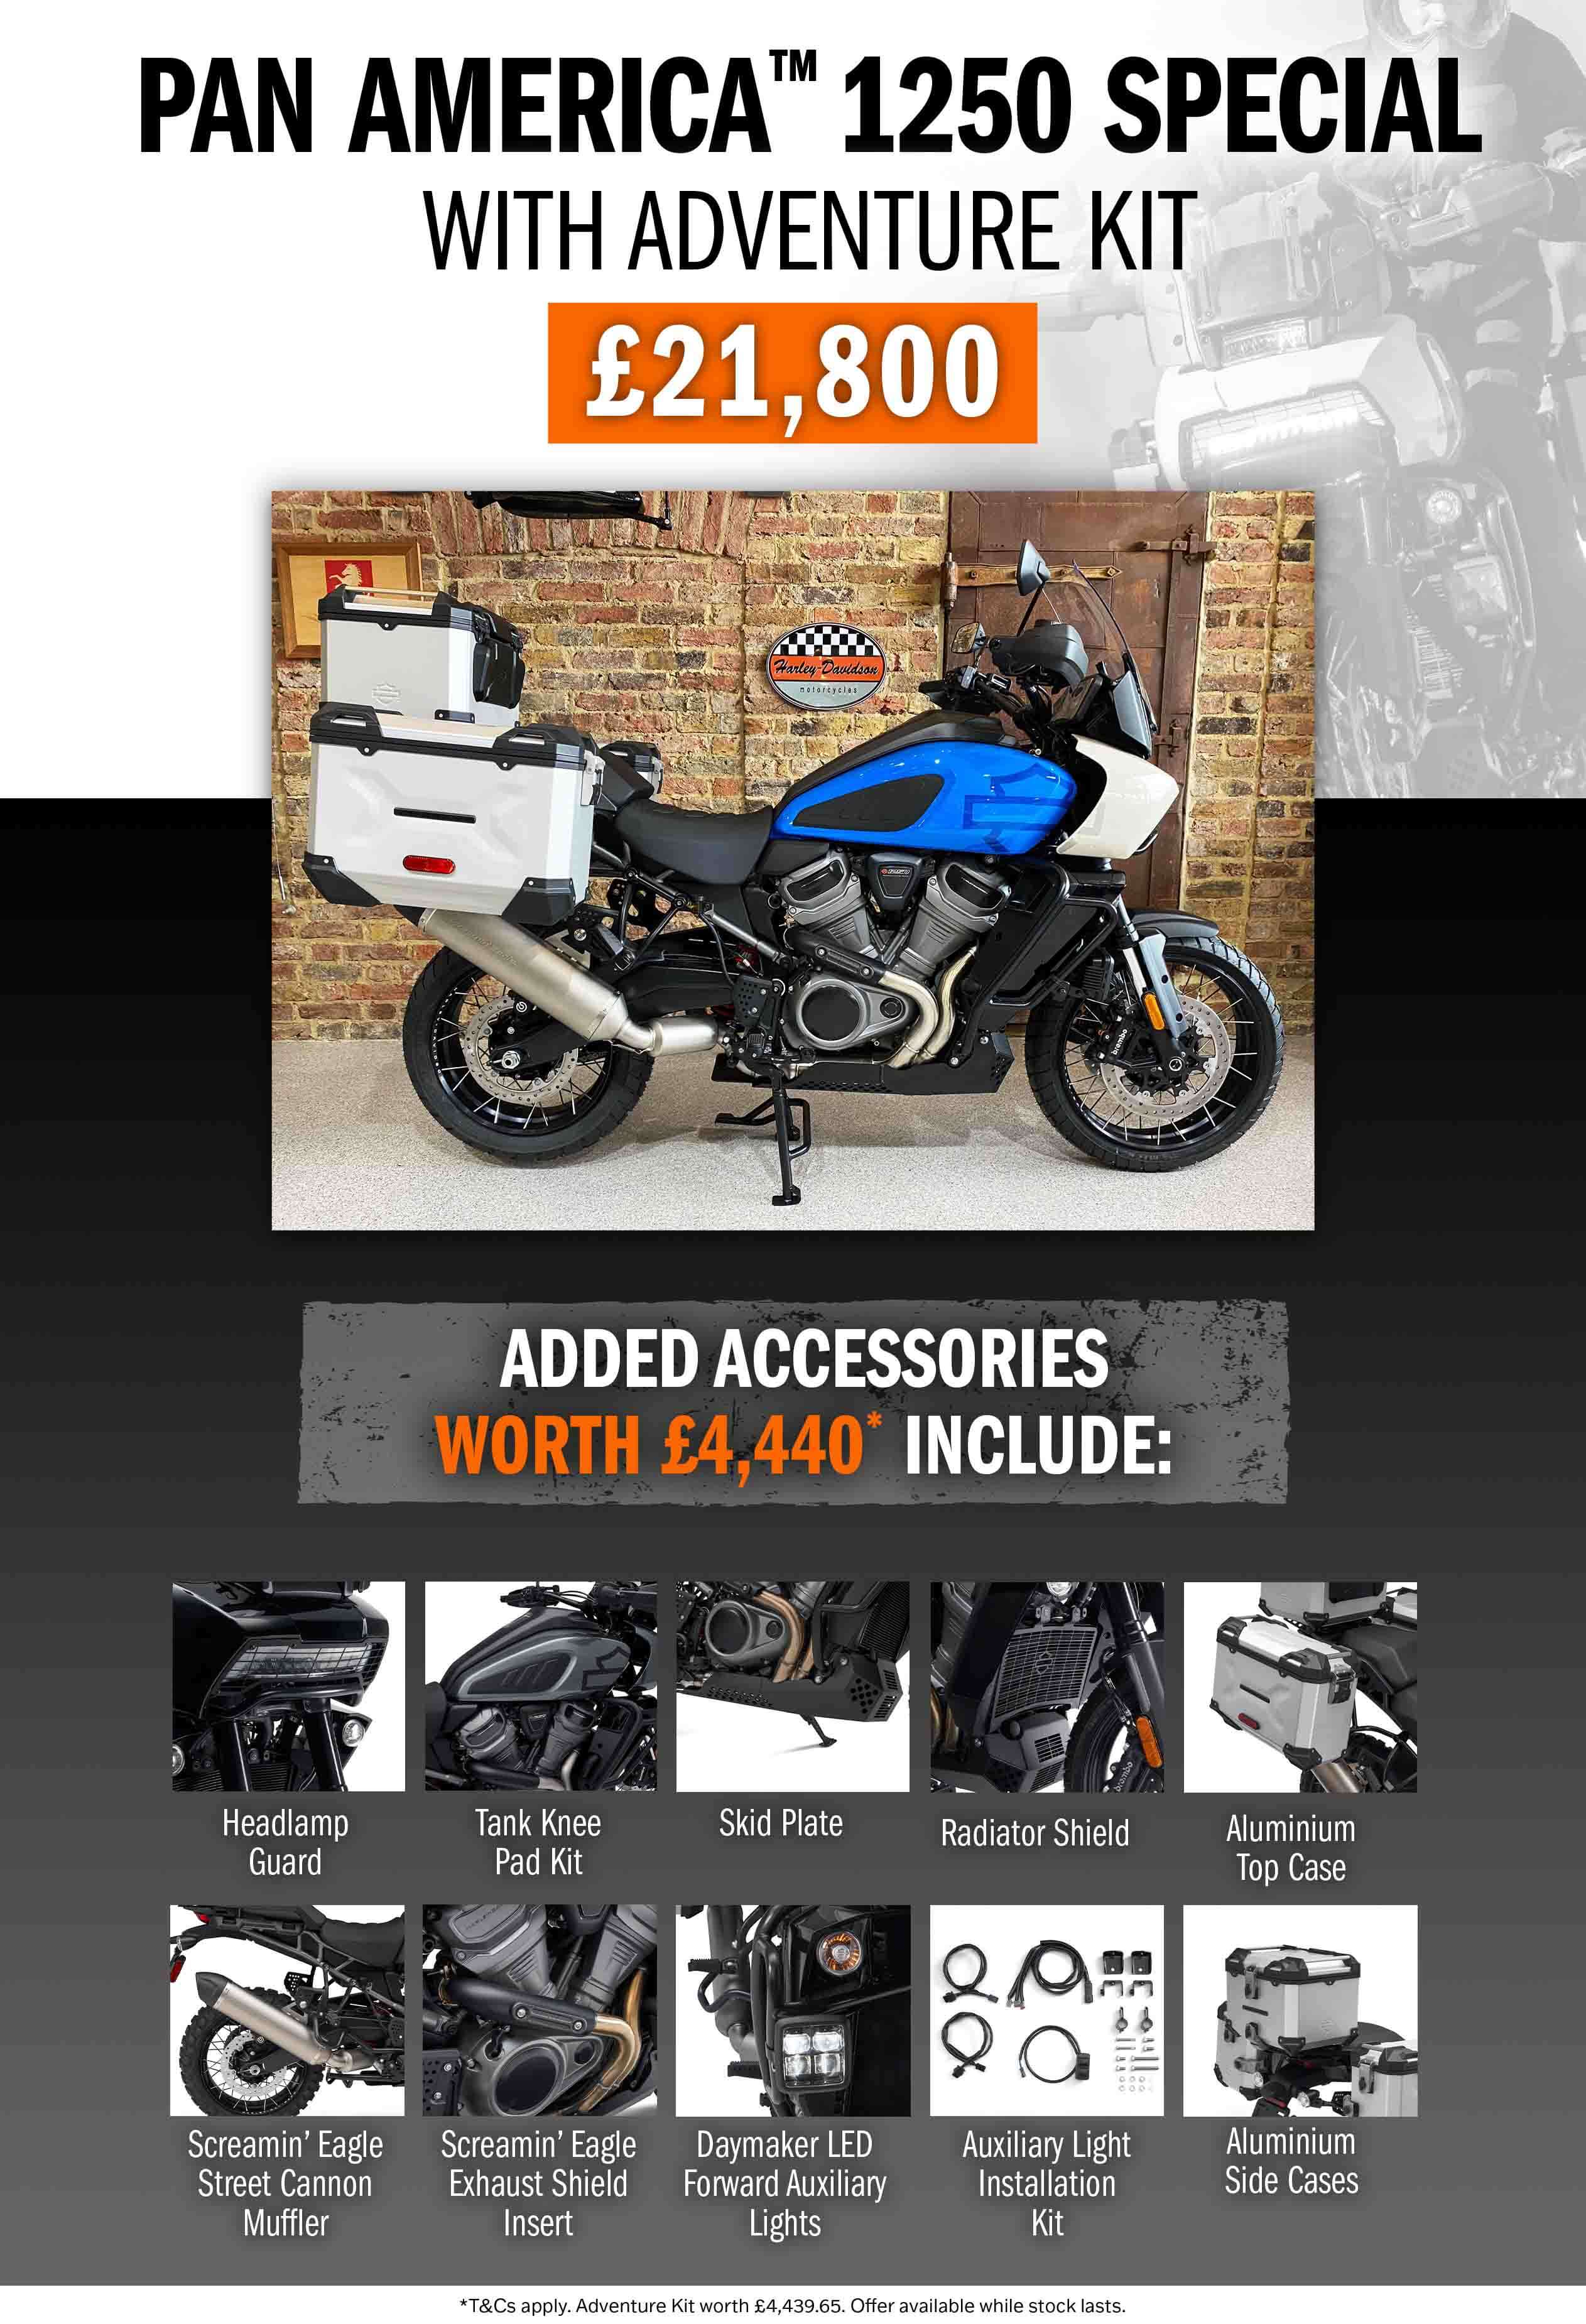 Pan America 1250 Special with Adventure Kit available at Maidstone Harley-Davidson